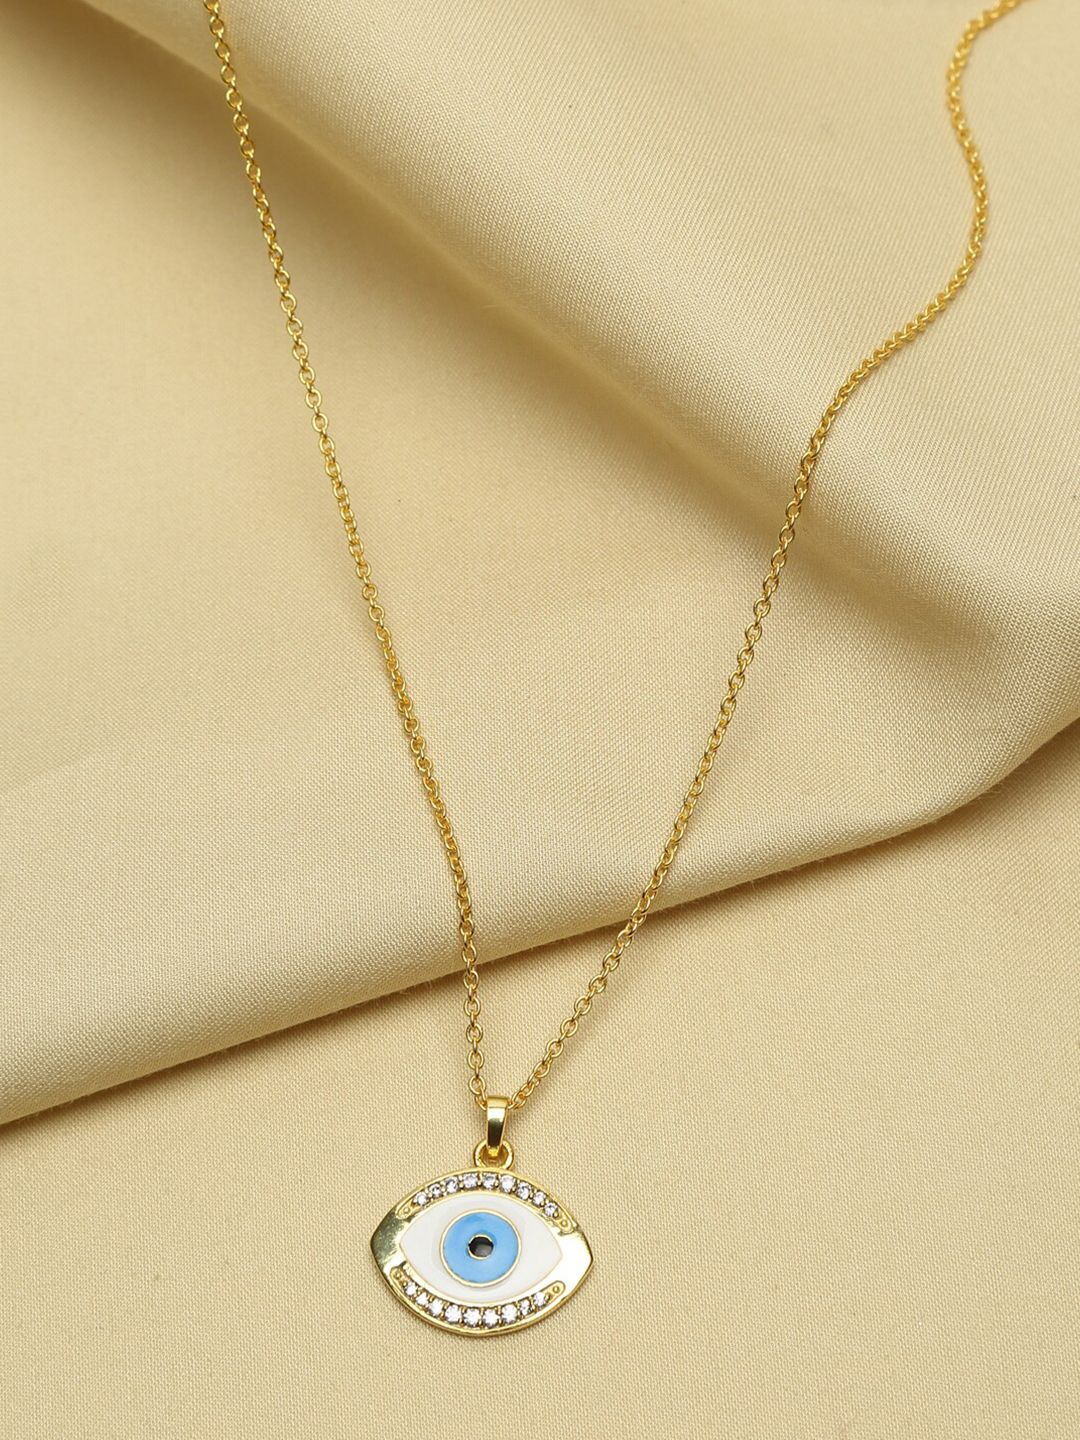 EK BY EKTA KAPOOR Gold-Toned & Blue Gold-Plated Chain Price in India